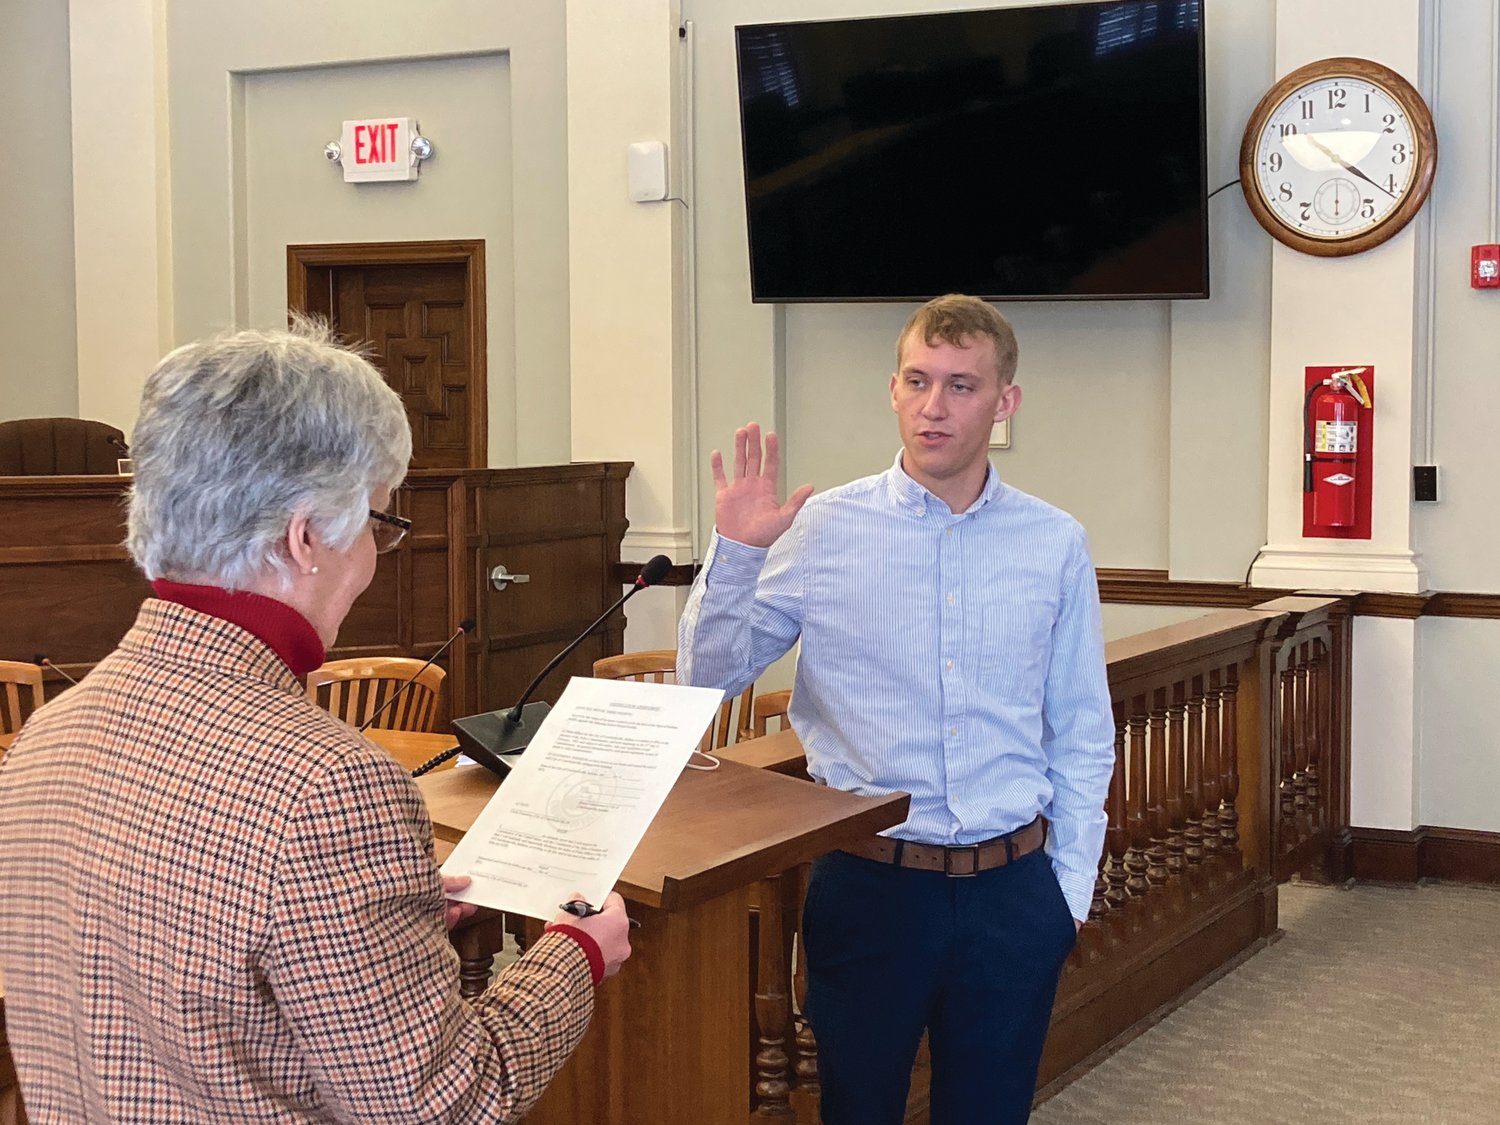 Newly-hired Crawfordsville Police Officer Judson Grubbs takes the oath from Clerk-Treasurer Terri Gadd in the City Building Wednesday. Grubb is beginning his law enforcement career in Crawfordsville.